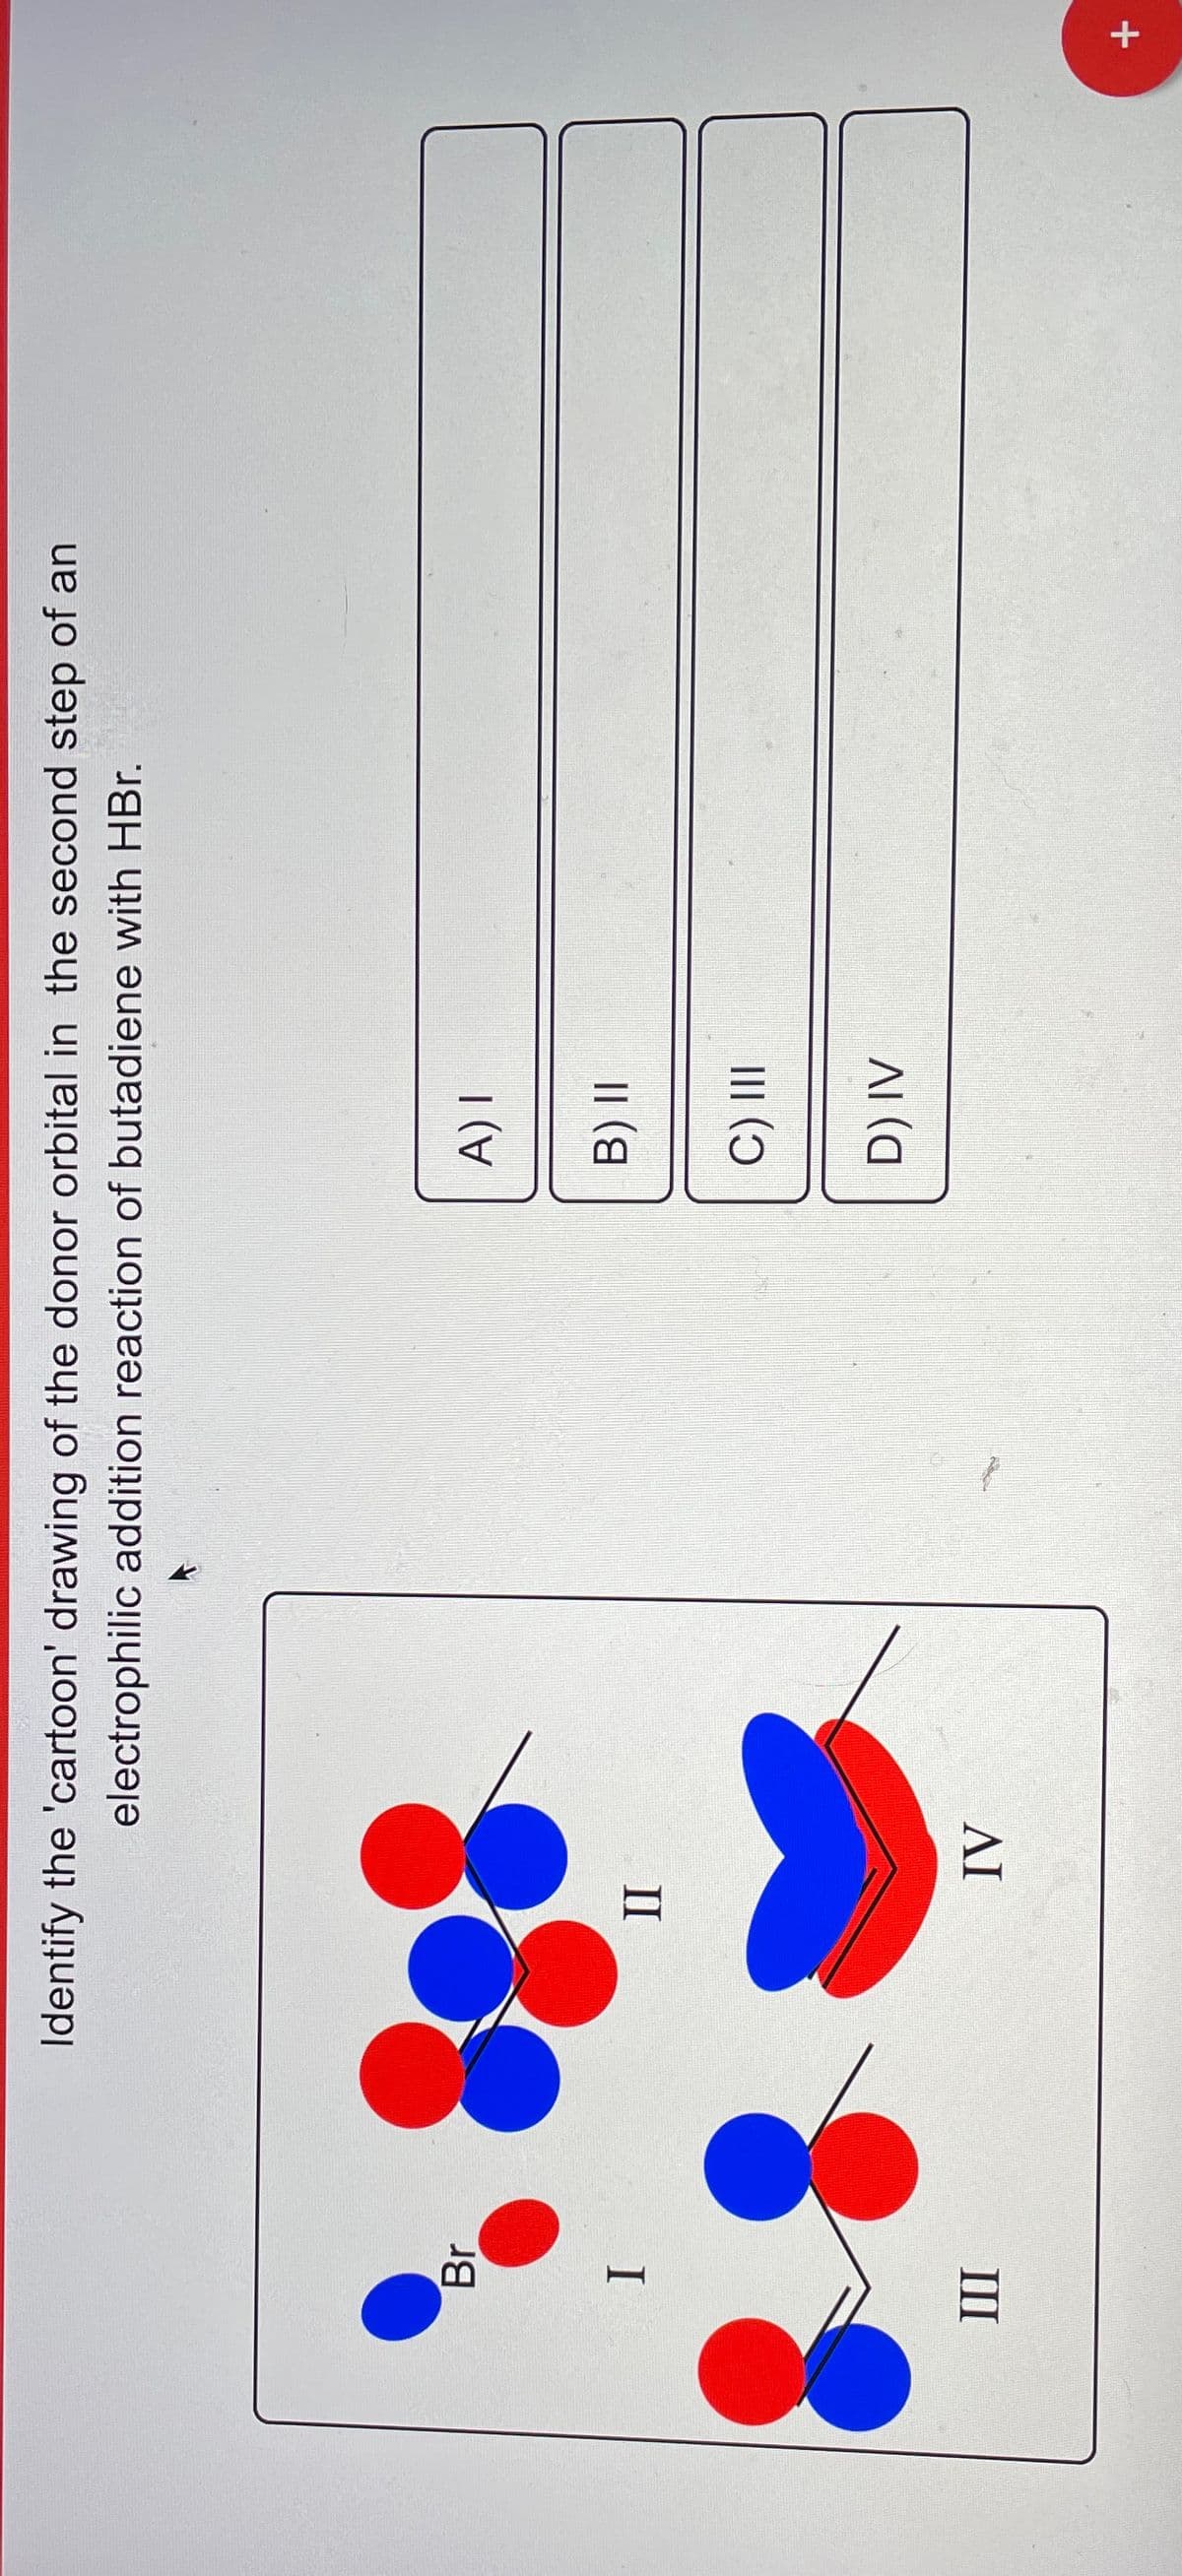 A)
AI
II
AI (a
III ()
II
I
Br
electrophilic addition reaction of butadiene with HBr.
Identify the 'cartoon' drawing of the donor orbital in the second step of an
